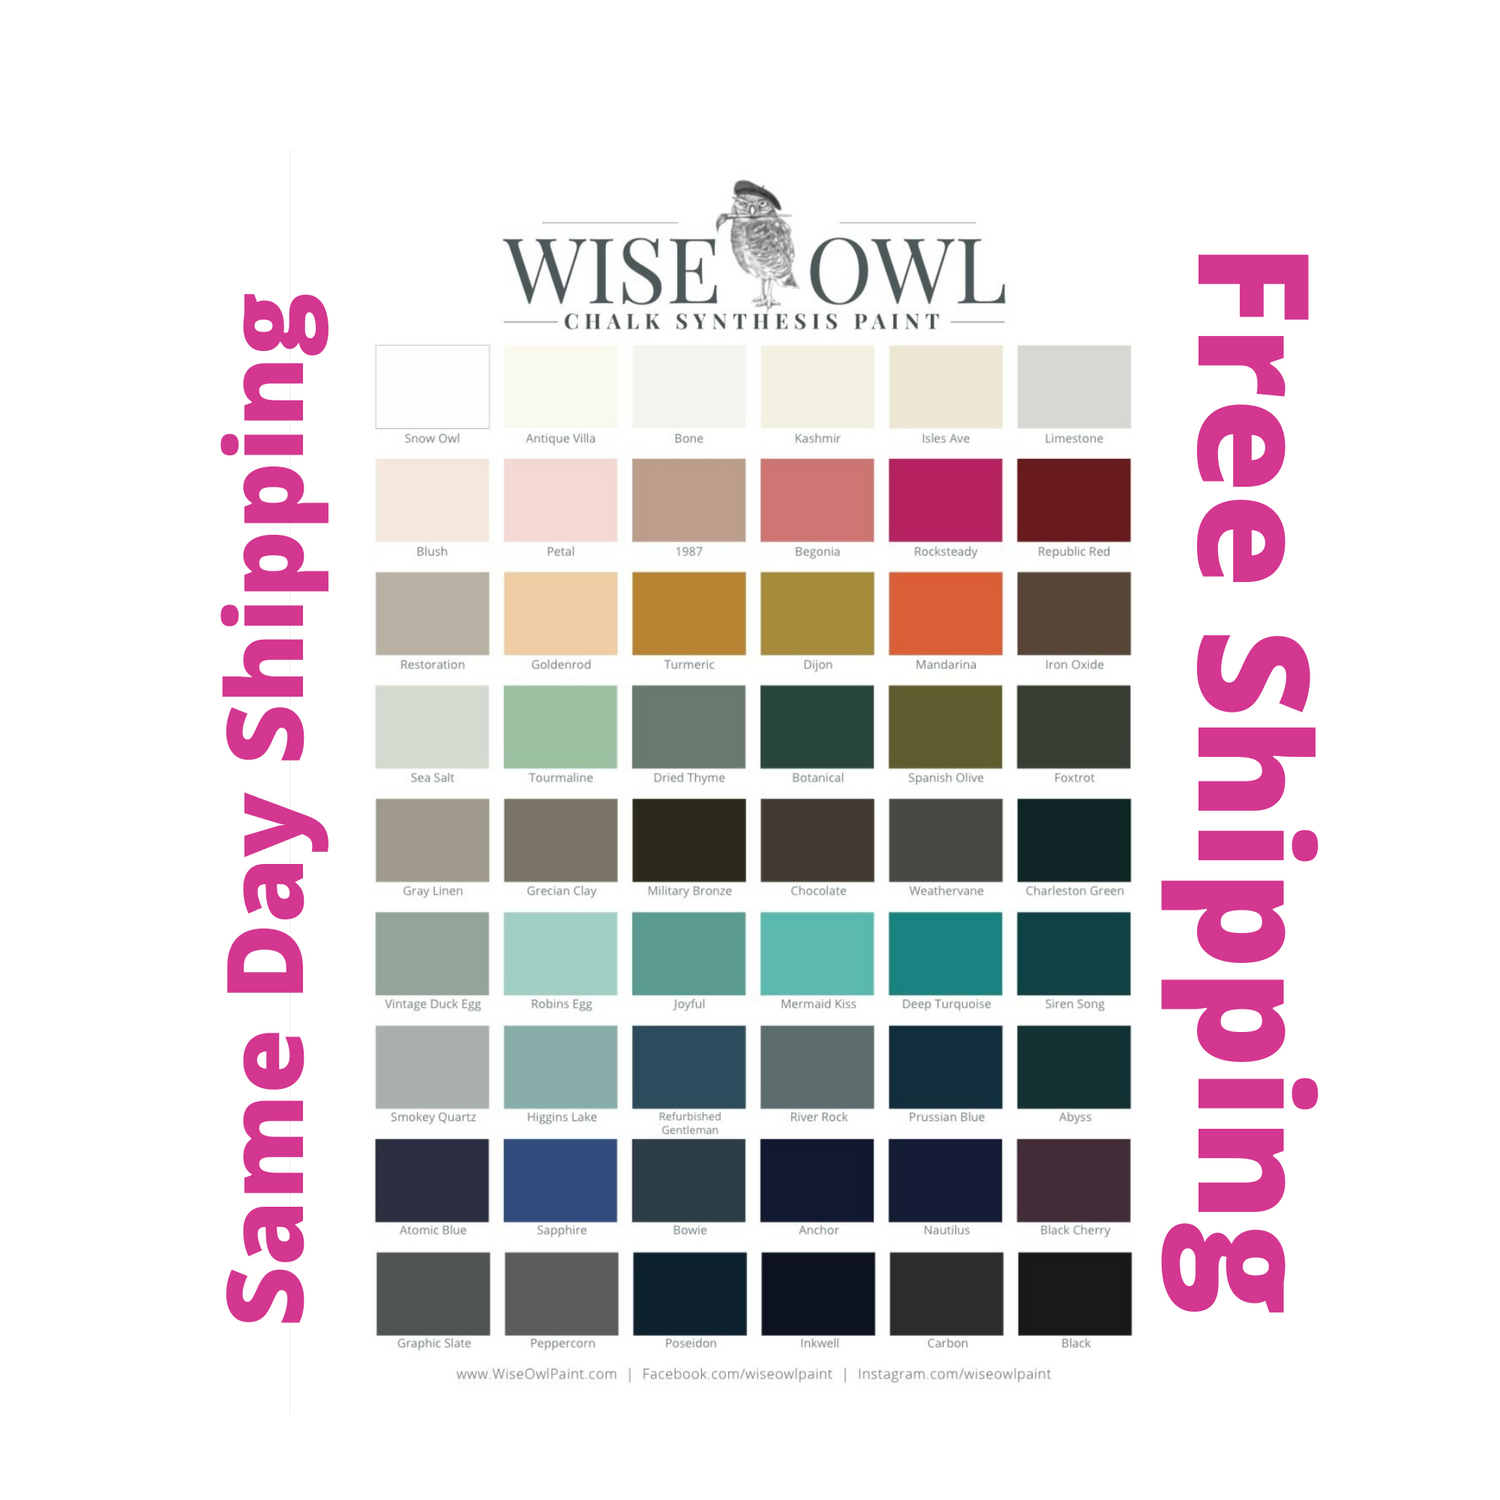 Wise Owl Chalk Synthesis Paint 16 oz Pint - Same Day Shipping - Chalk Paint for Furniture and Cabinets - belleandbeau850